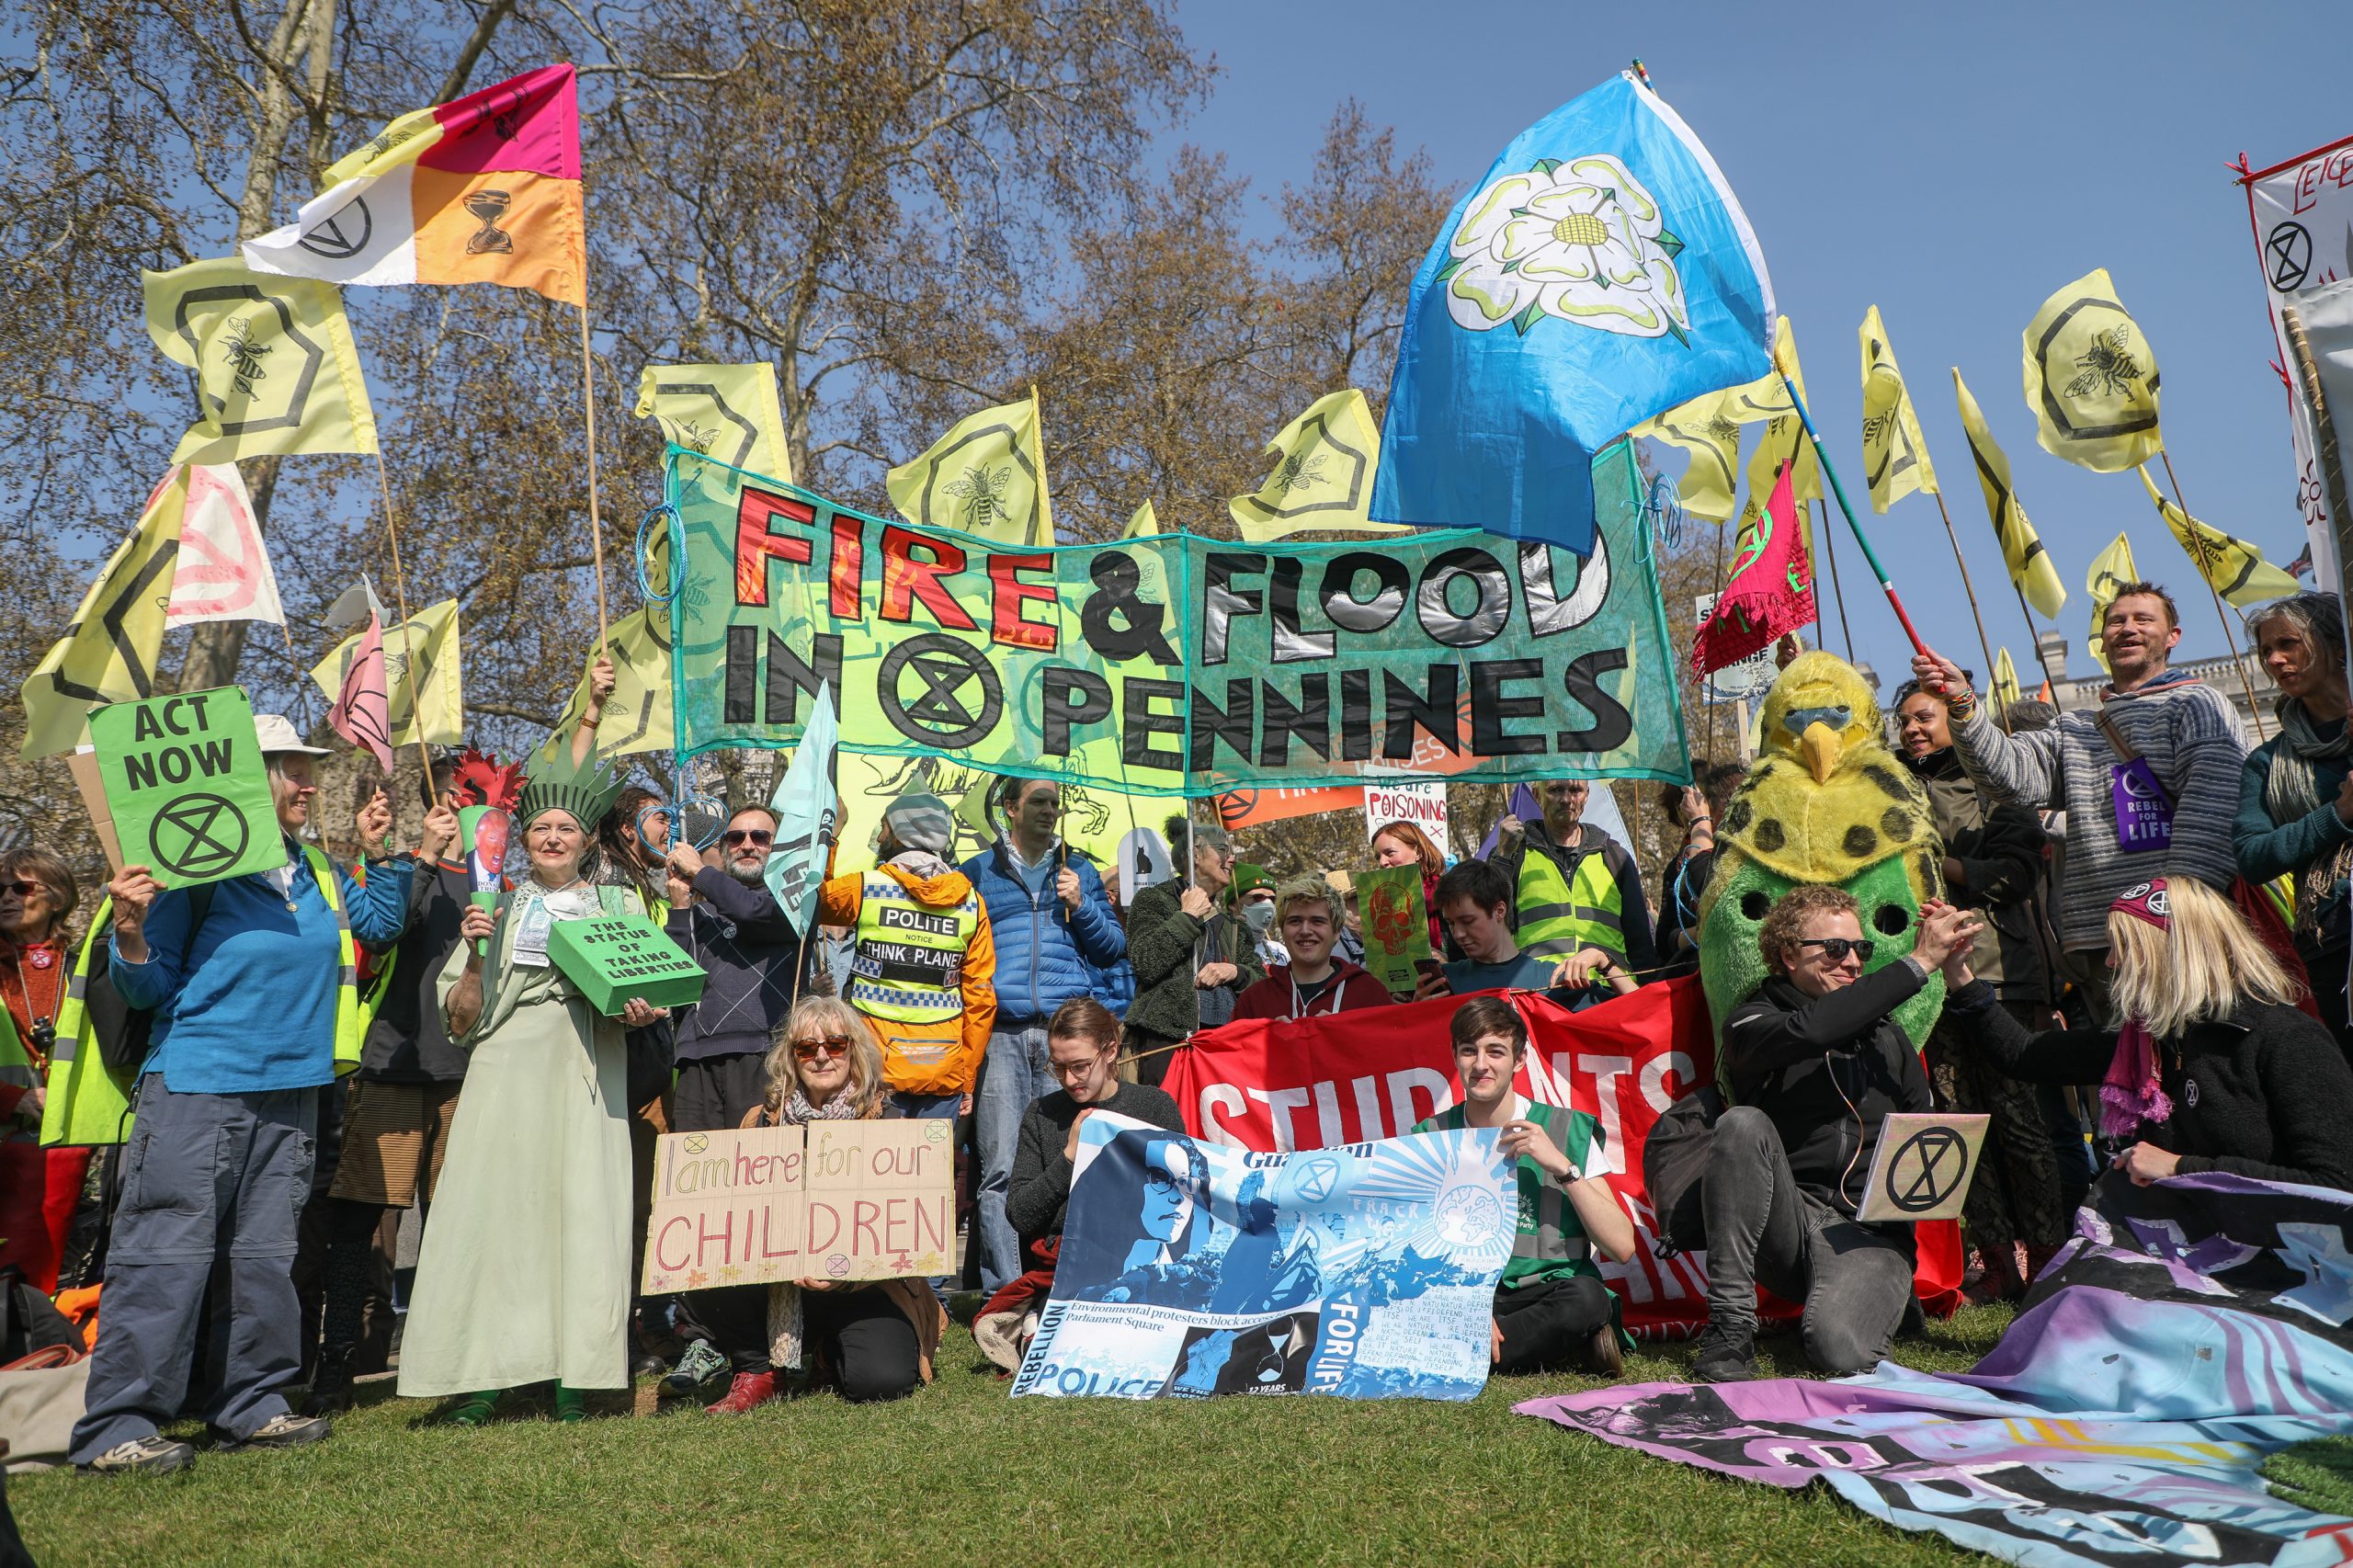 Lots of people gathered outside on a sunny day, holding up climate activism banners and flags. In the centre is a large blue 'netty' banner which says 'Fire & Flood In Pennines' with the Extinction Rebellion logo. 